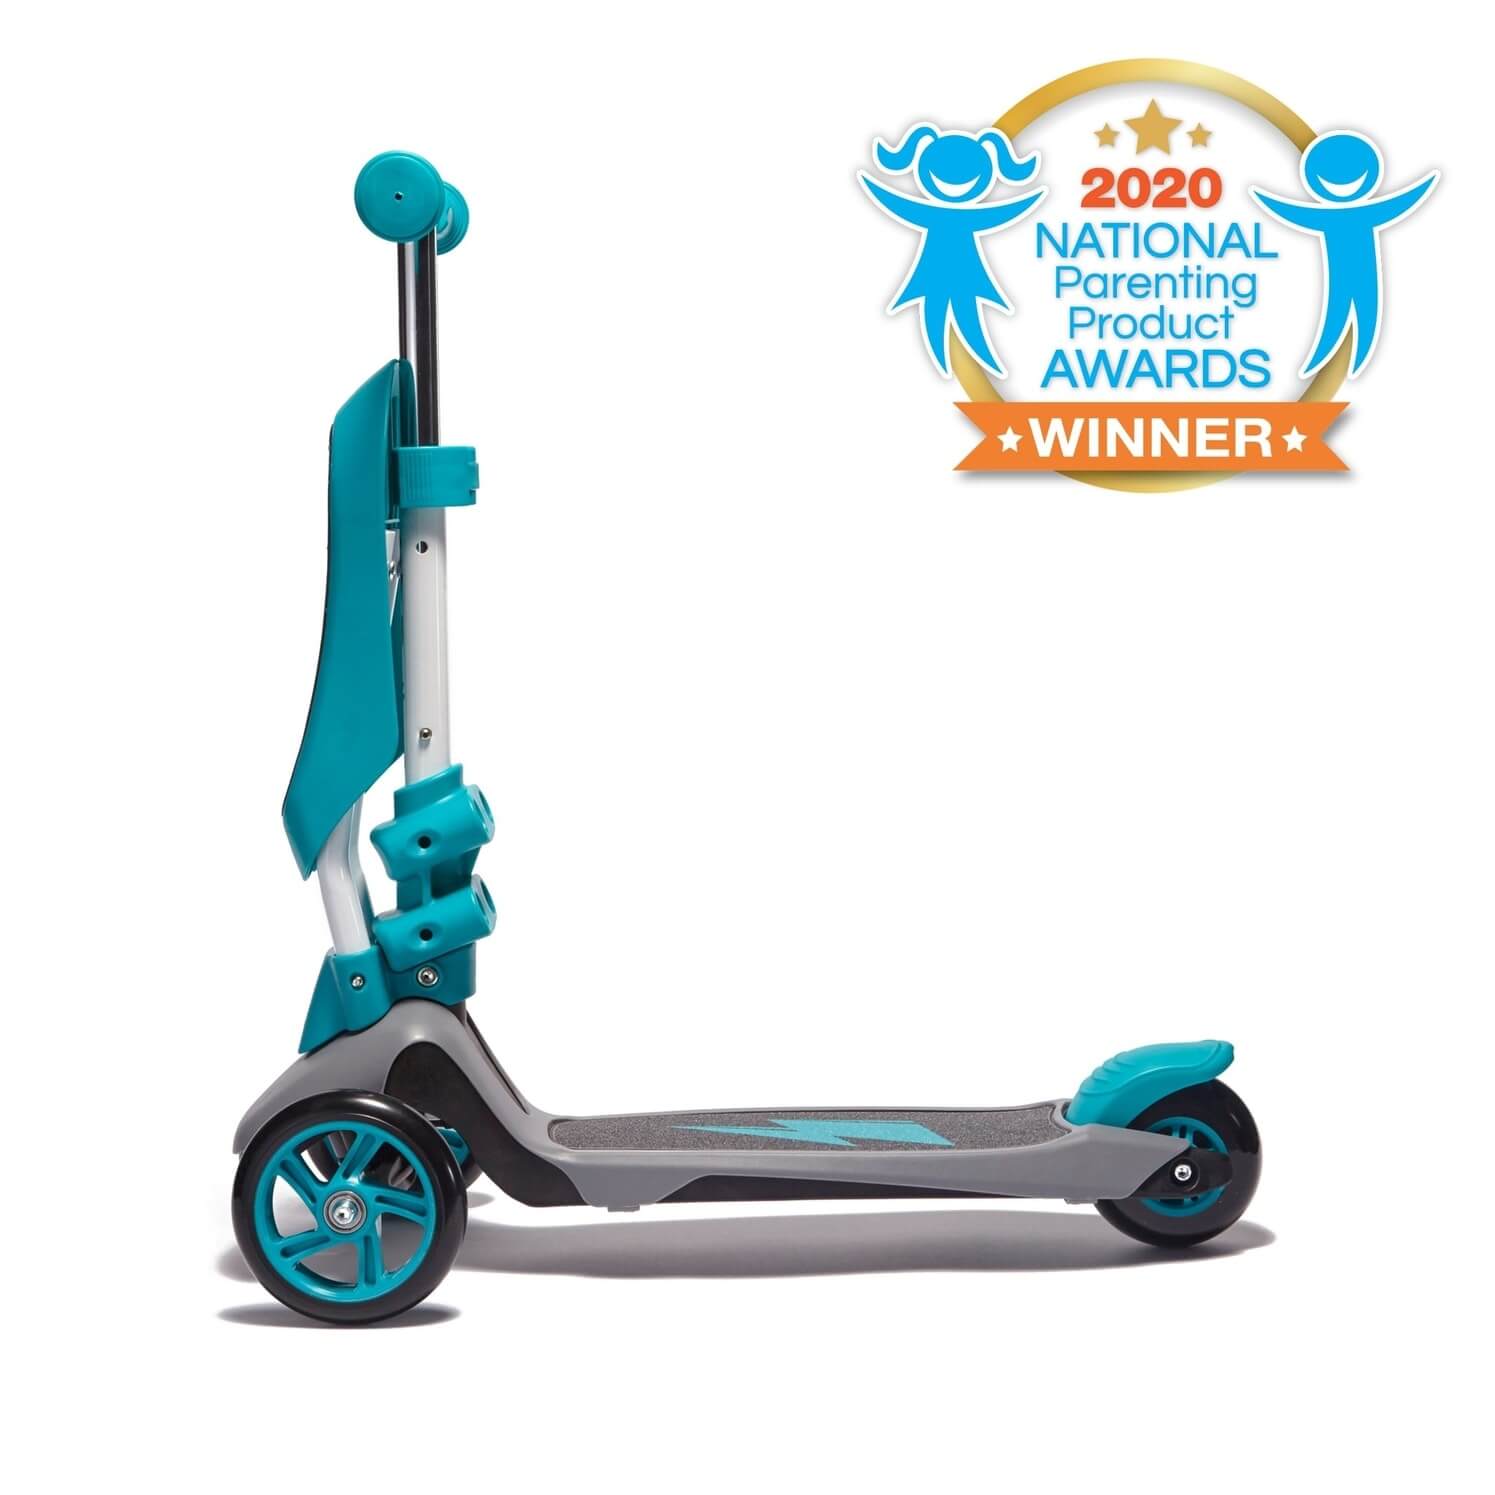 Award winning Svolta Ace 2-in-1 Toddler Scooter Ride On Teal Grey Front Standing